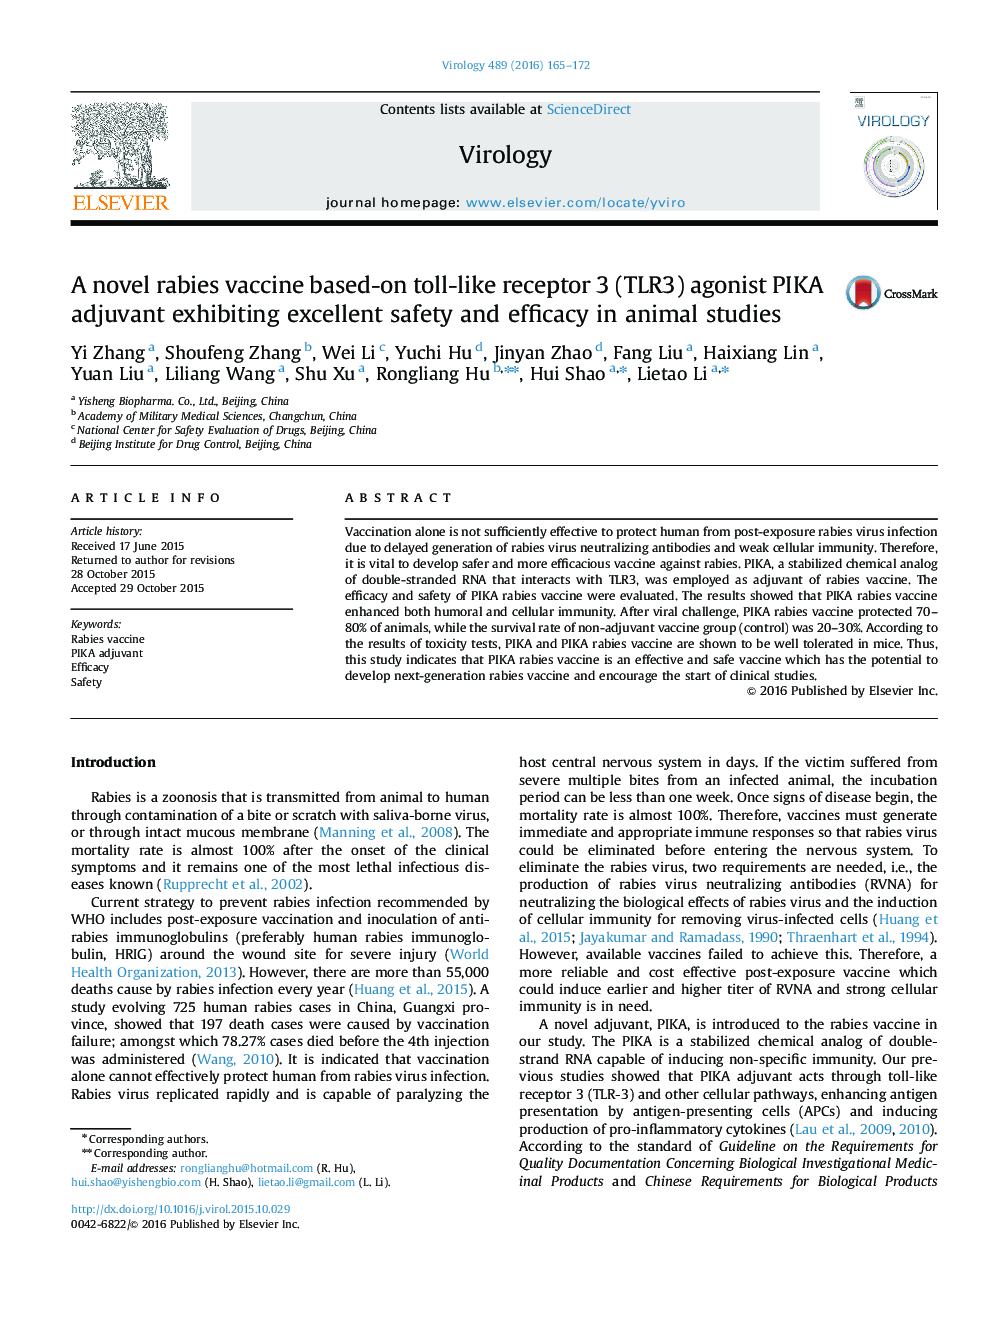 A novel rabies vaccine based-on toll-like receptor 3 (TLR3) agonist PIKA adjuvant exhibiting excellent safety and efficacy in animal studies